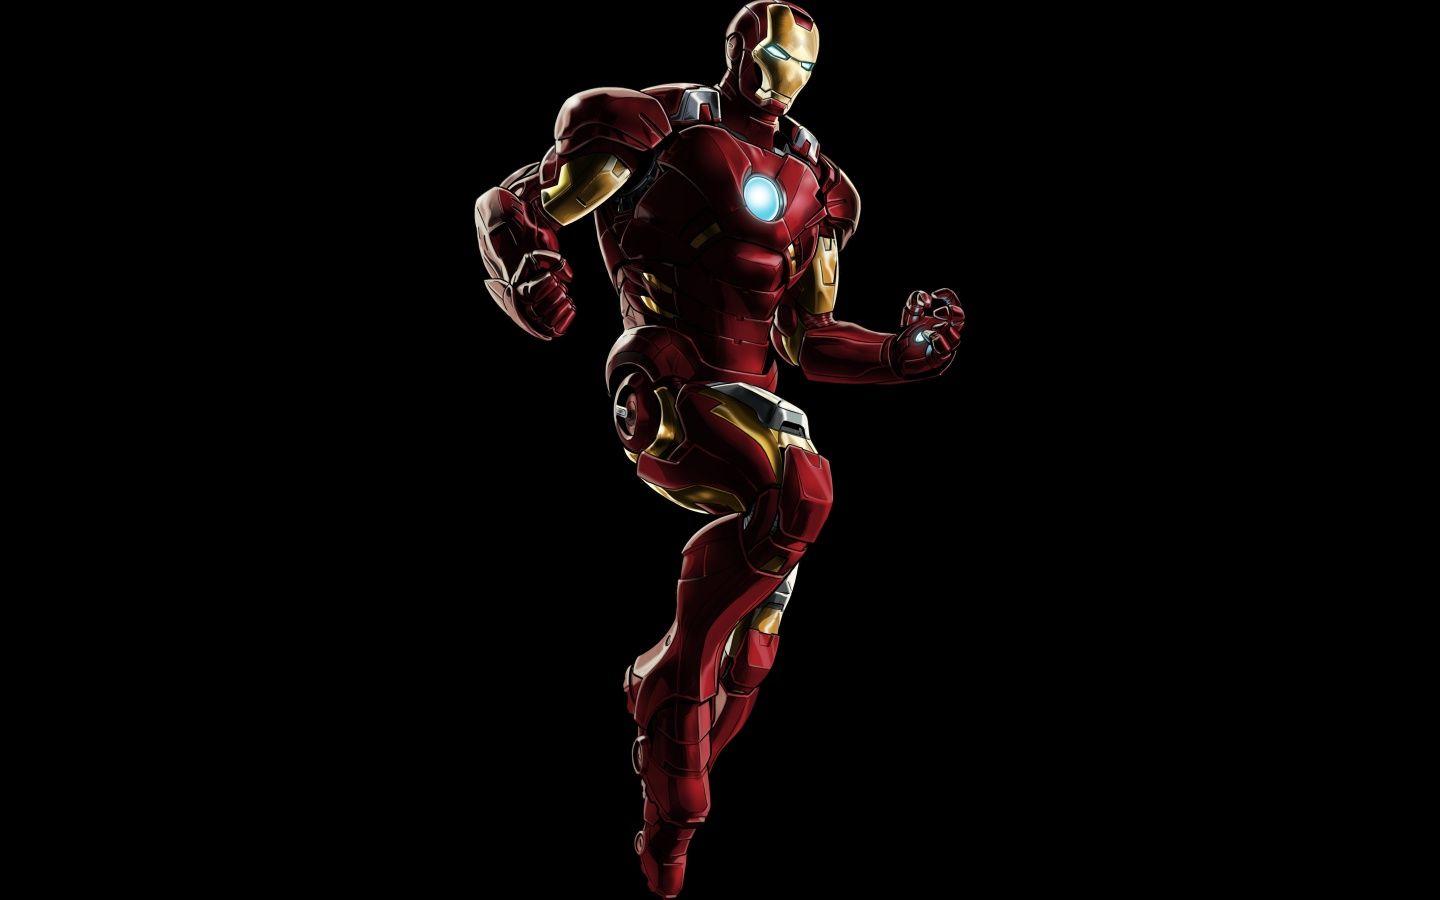 4K Iron Man Wallpapers in jpg format for free download